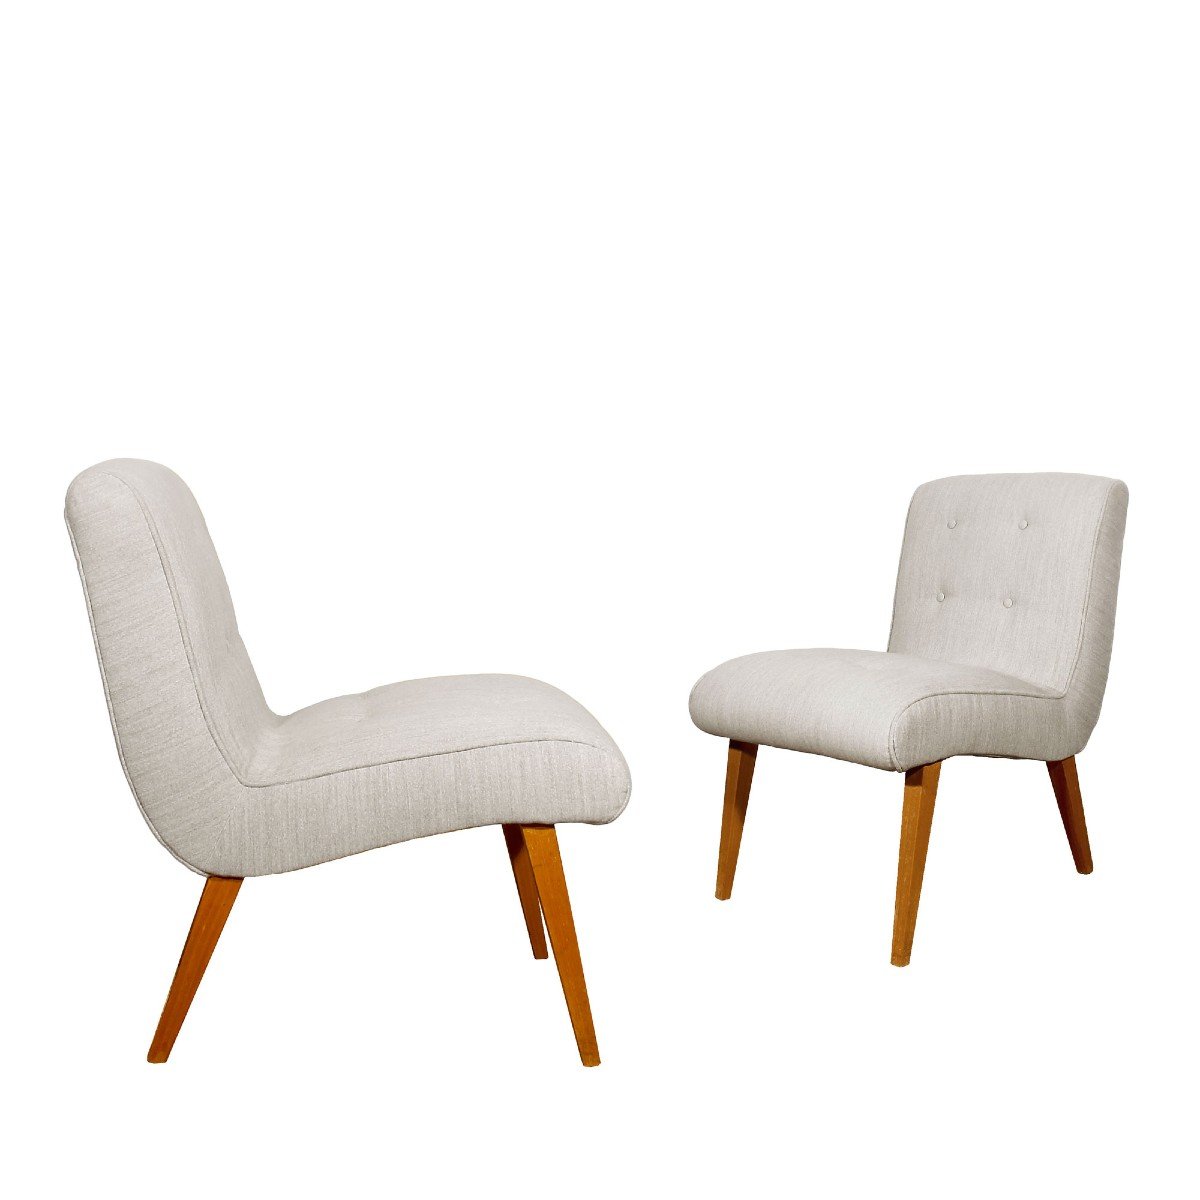 Pair Of Vostra Low Chairs By Walter Knoll